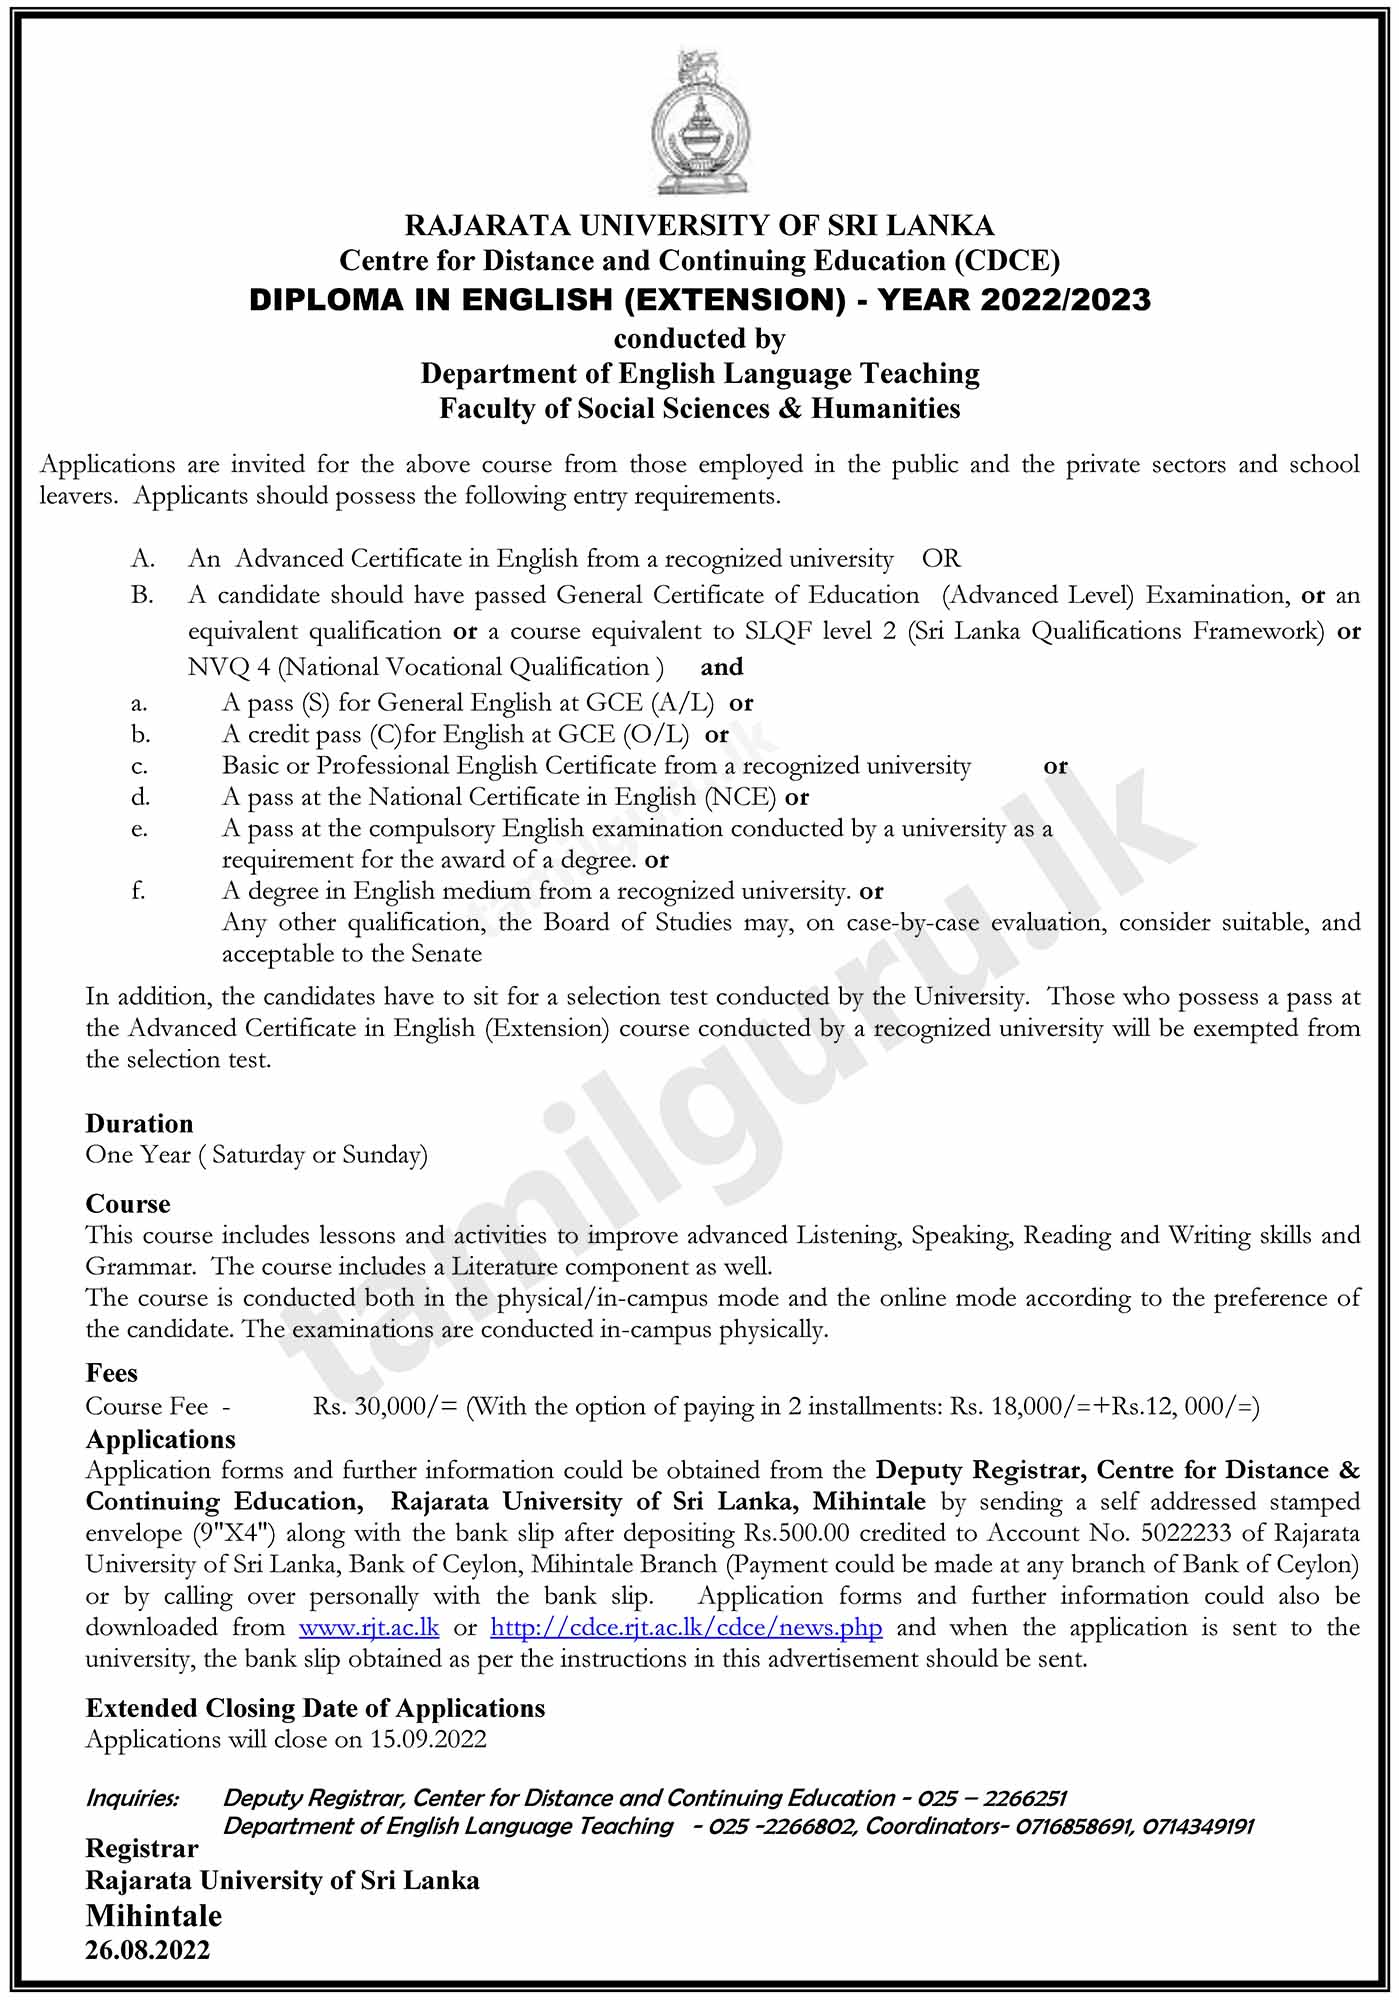 Calling Applications for Diploma in English (Extension Course) 2022/2023 Conducted by Rajarata University of Sri Lanka (RUSL)